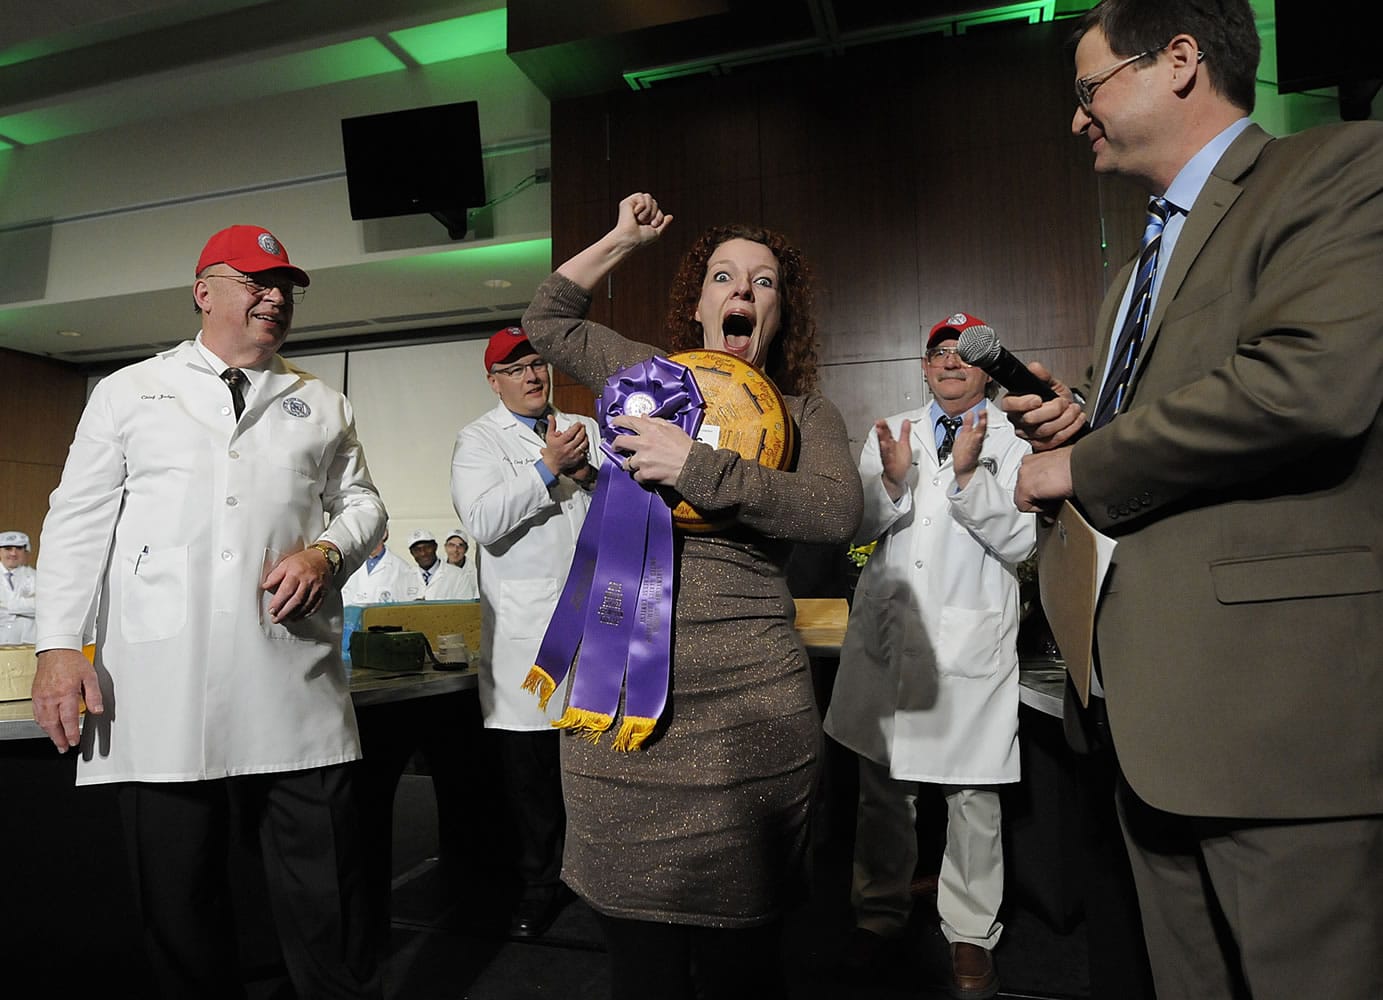 Marieke Penterman, center, owner of Holland's Family Cheese LLC in Thorp, Wis., reacts after winning first place in the U.S. Cheese Championship Contest at Lambeau Field in Green Bay, Wis., on Wednesday.